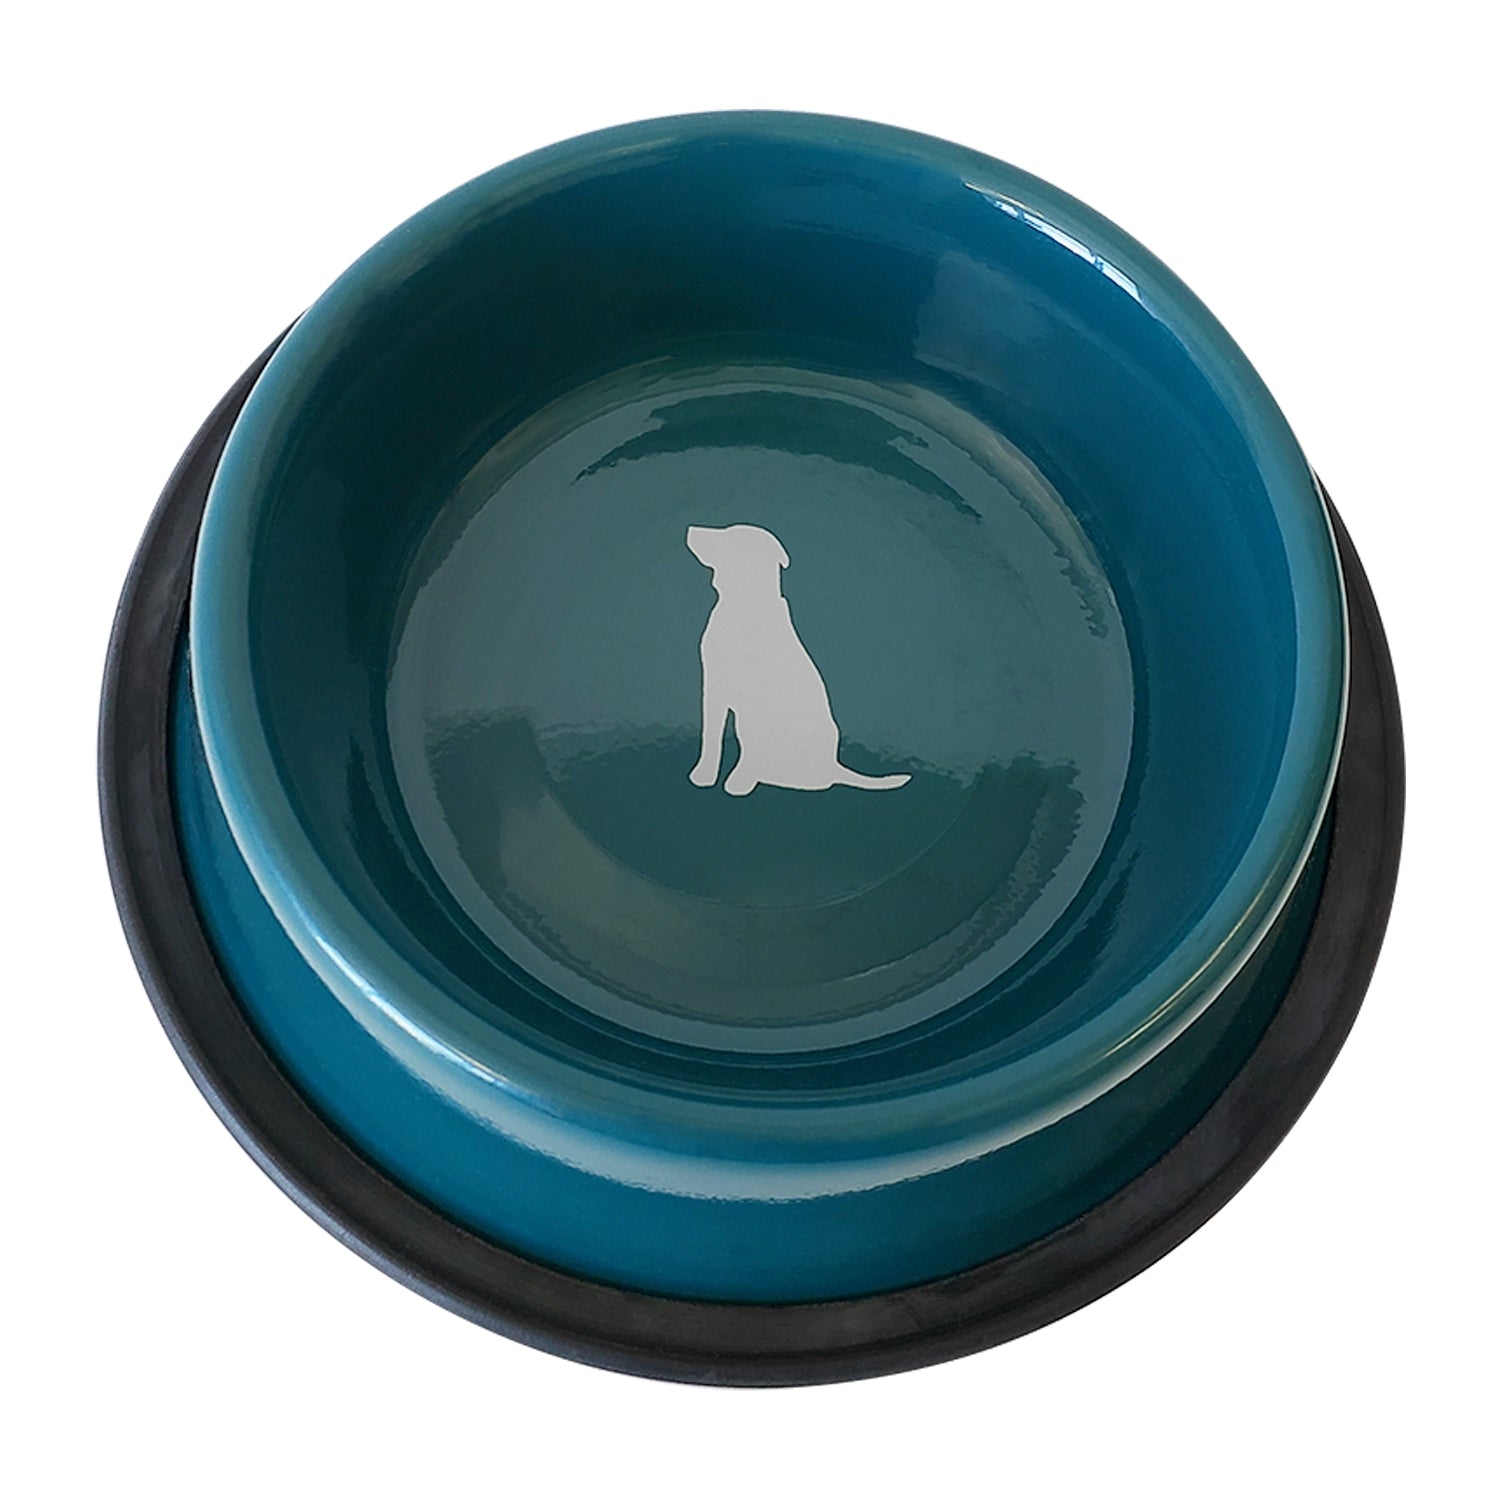 Jojo Modern Pets - Nonskid Dog Bowl with Cool Gray Dog Silhouette - Teal